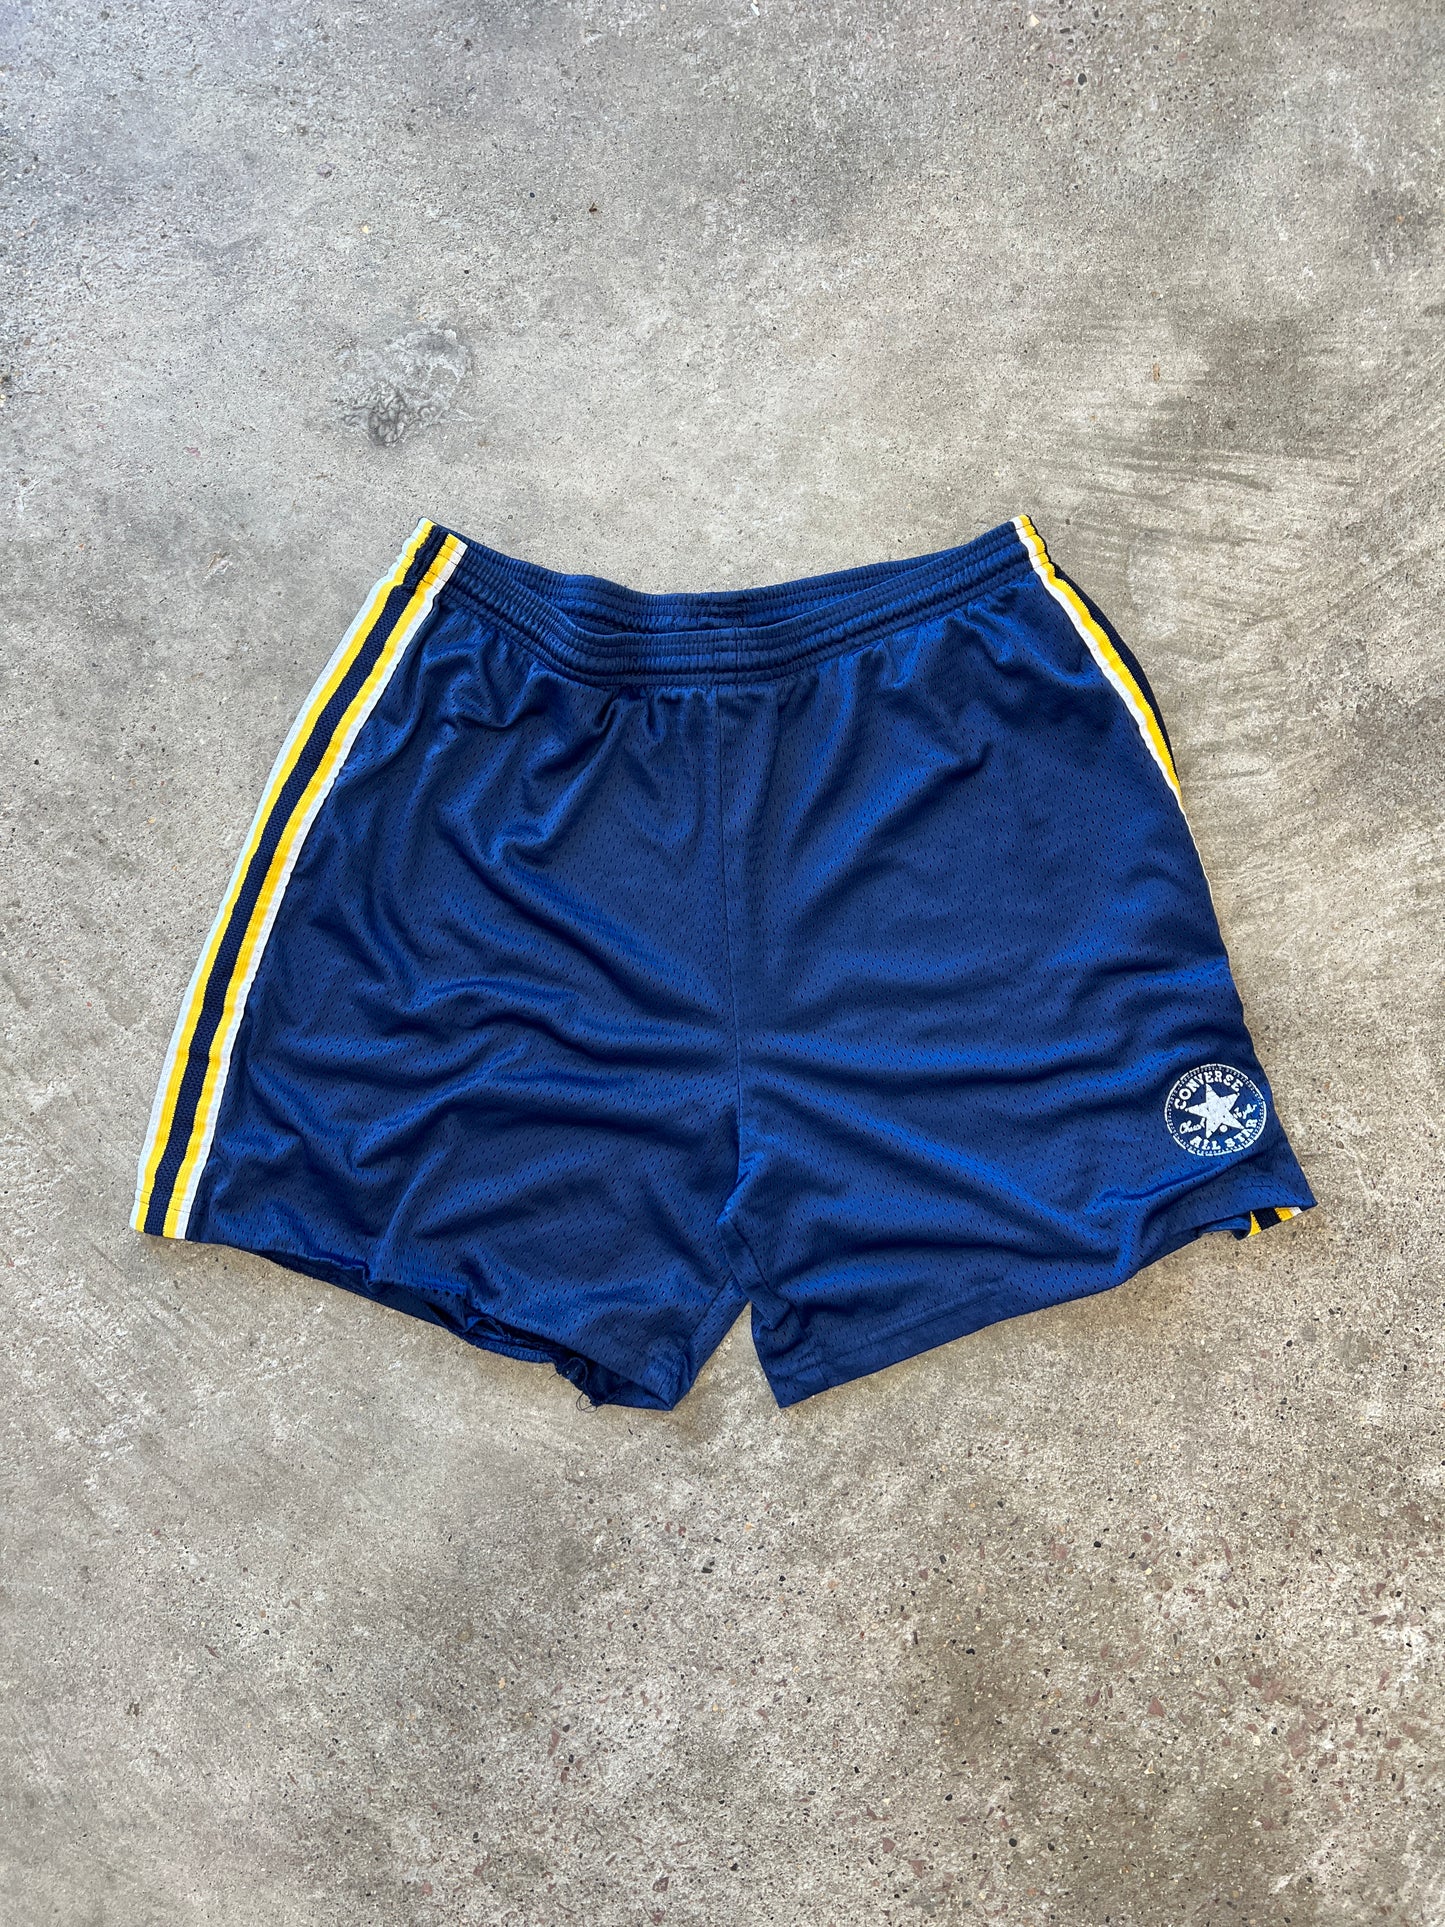 Vintage Convers Stripped Shorts - L